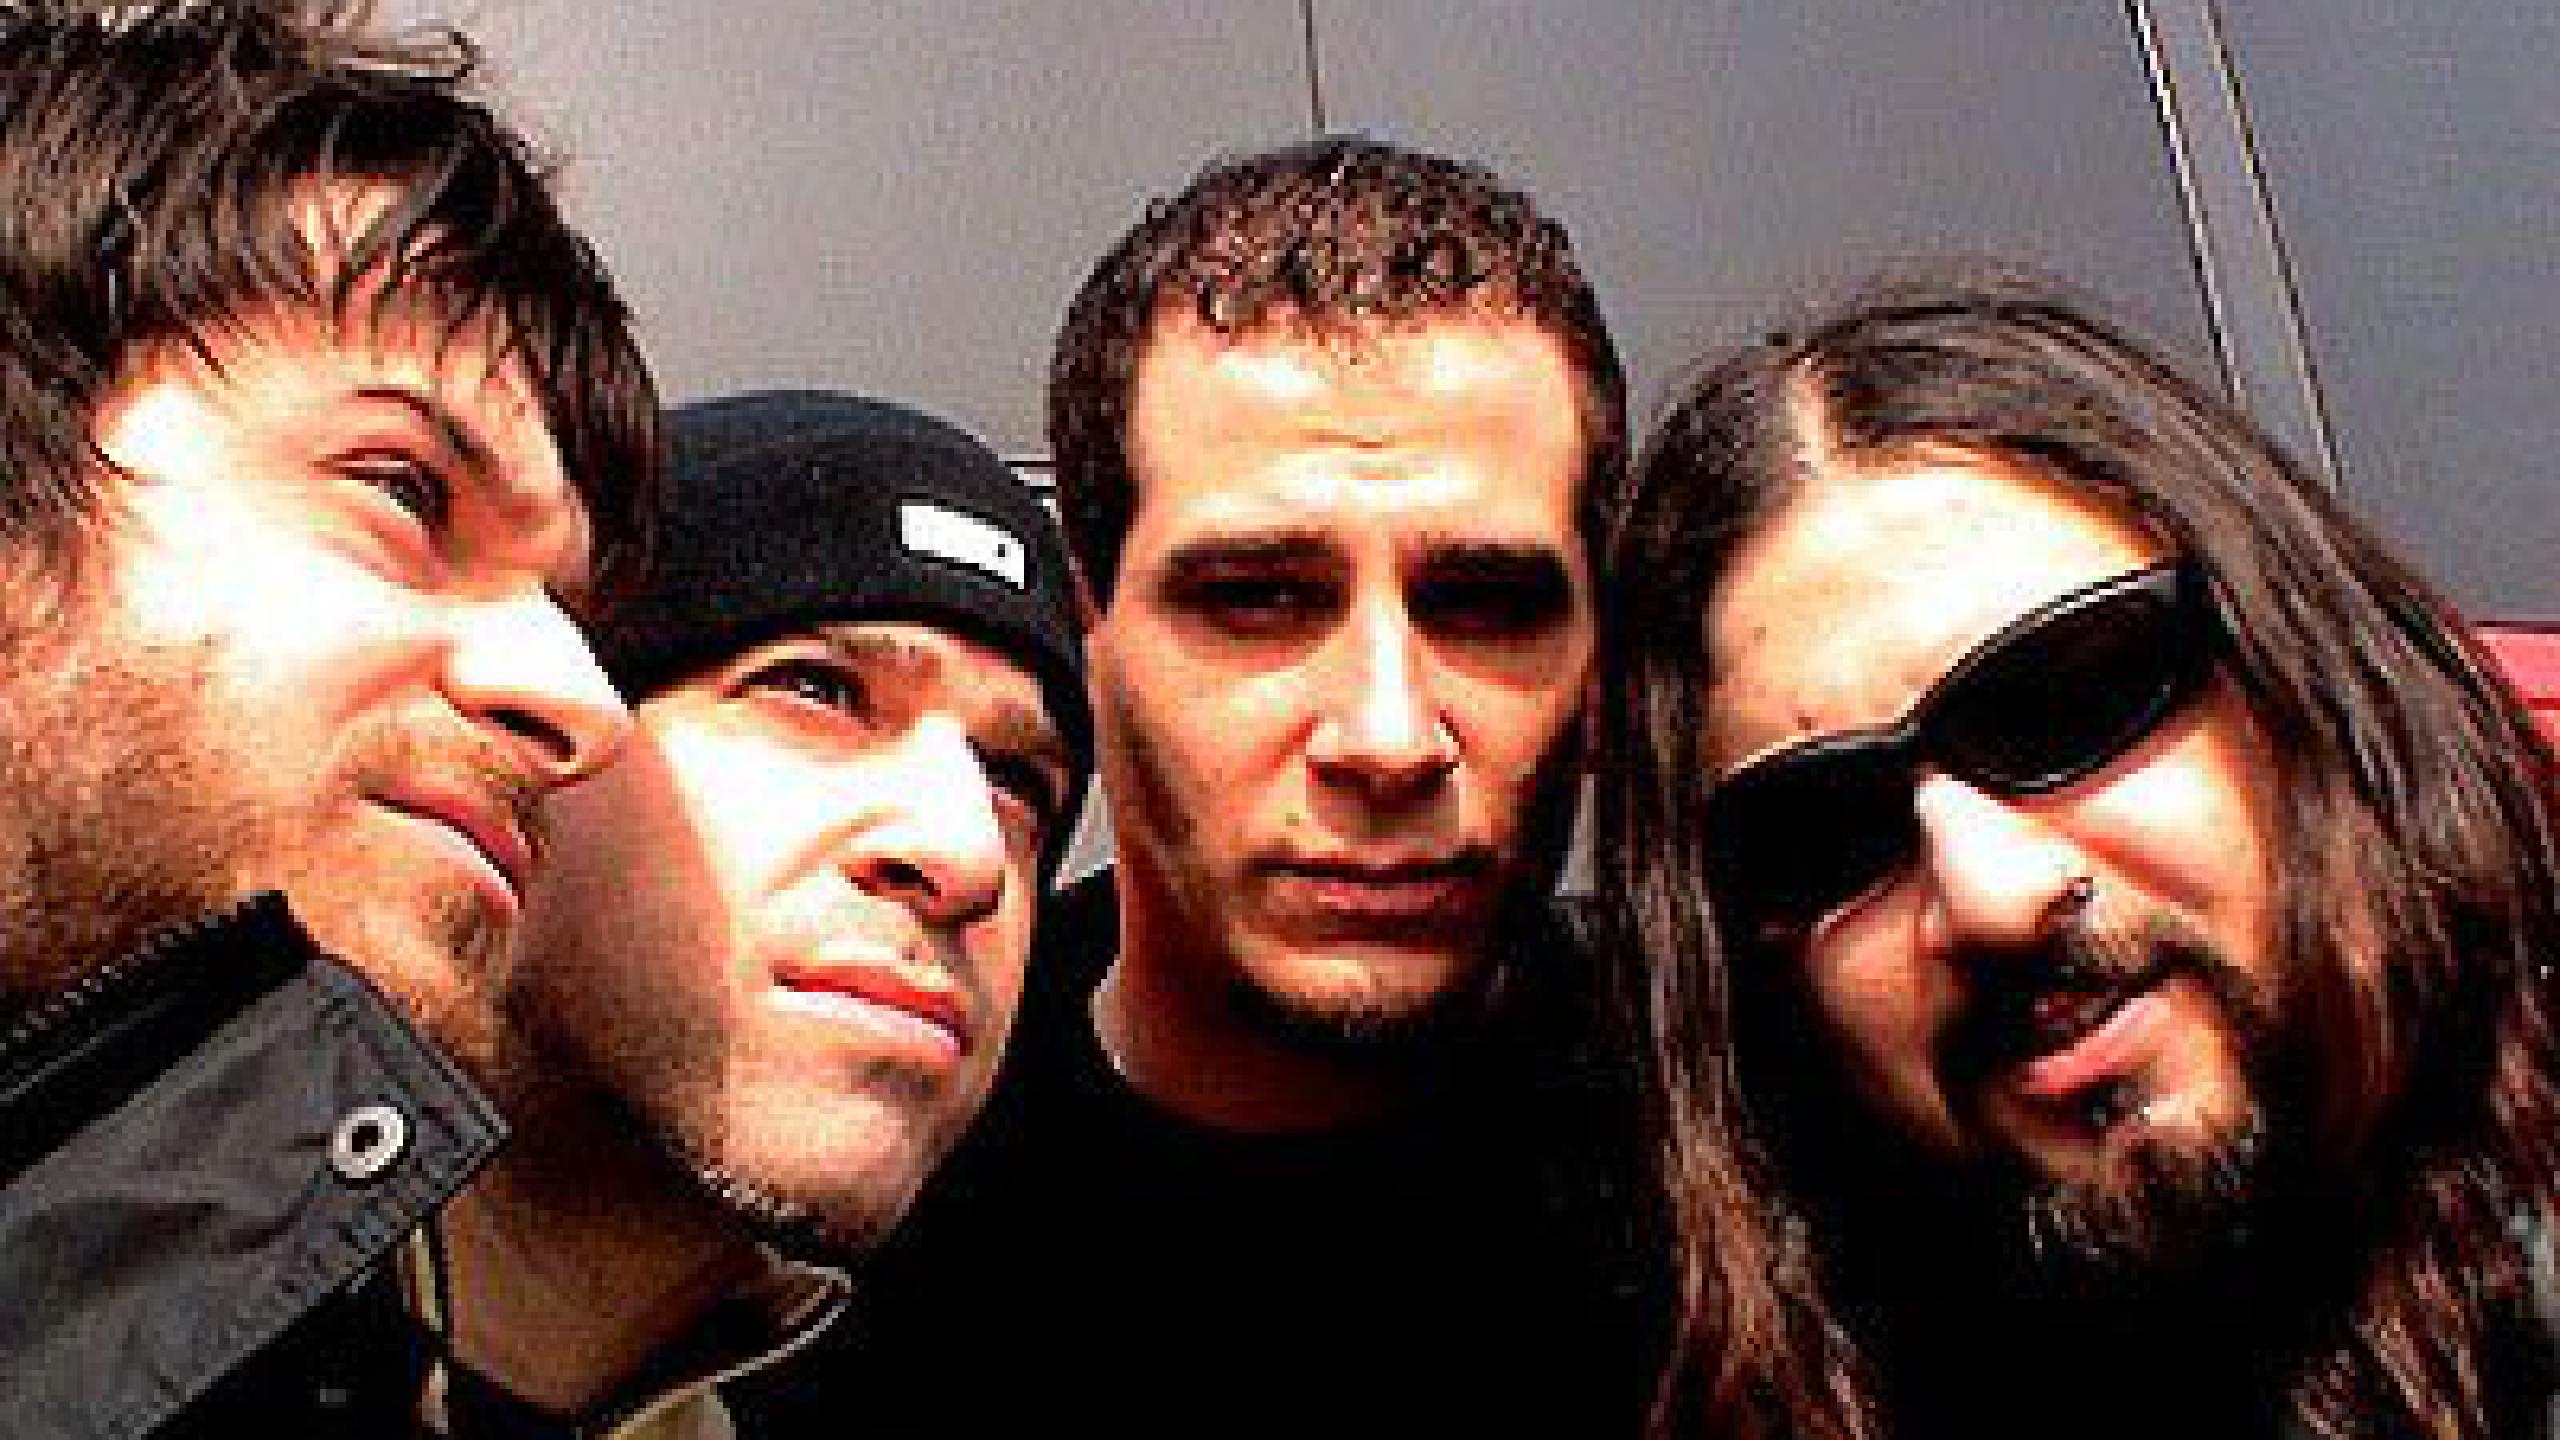 Life of Agony tour dates 2022 2023. Life of Agony tickets and concerts